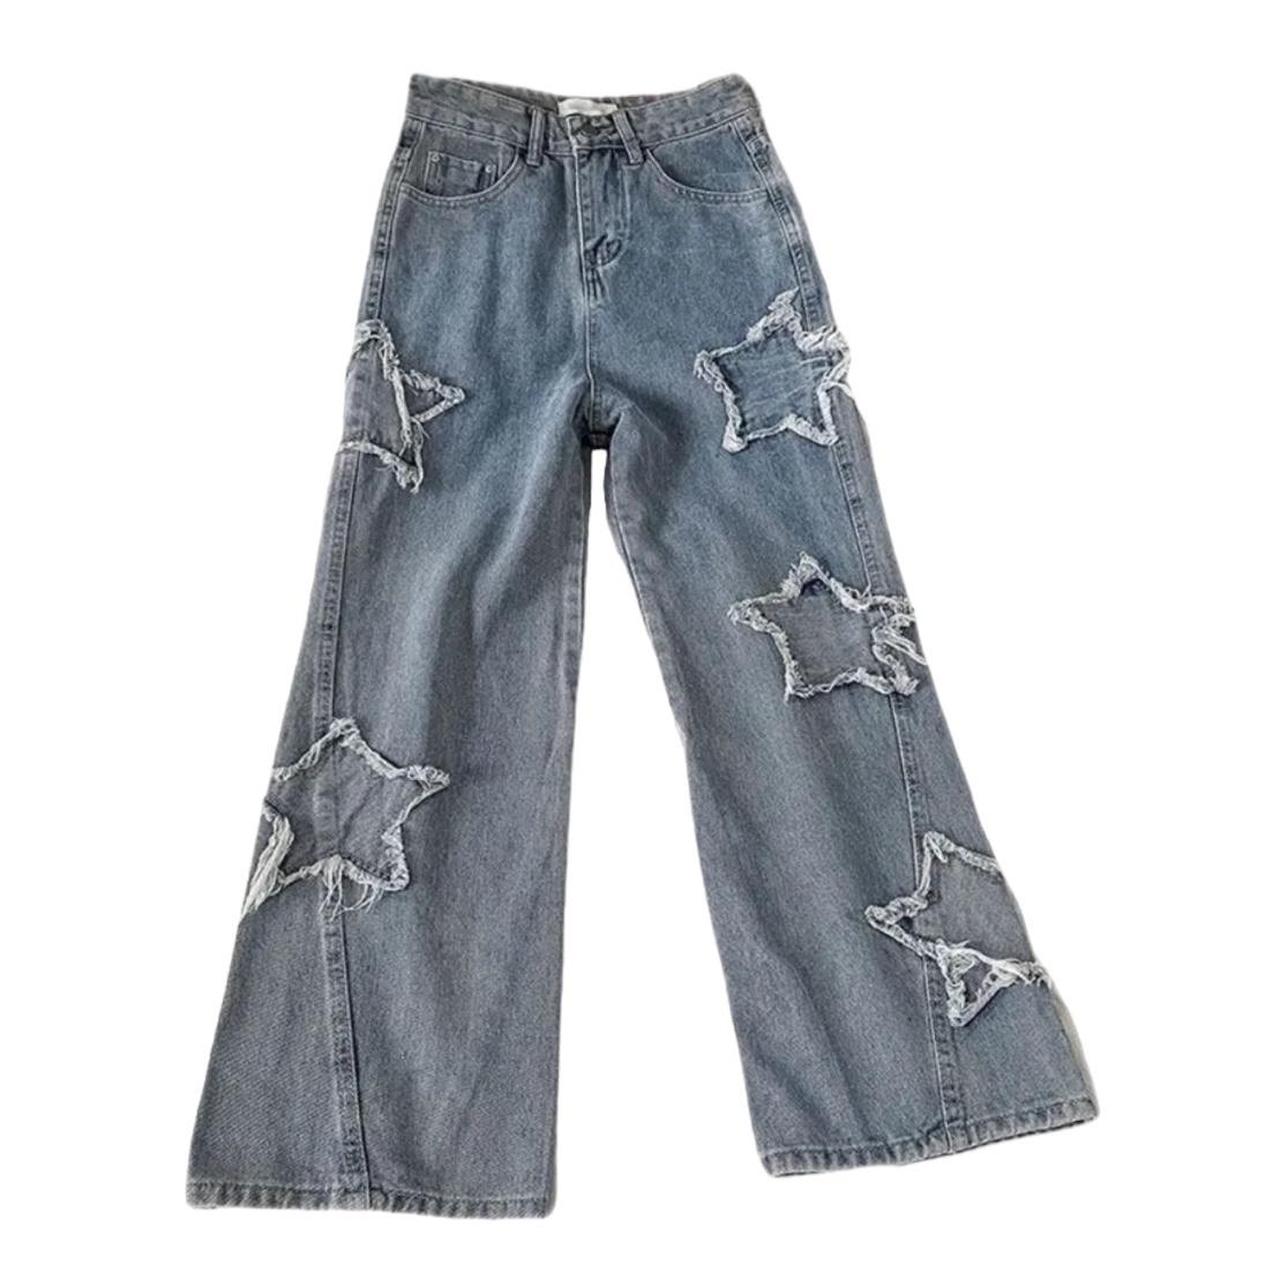 Women’s Y2K Style Star Print High Waisted Jeans in... - Depop